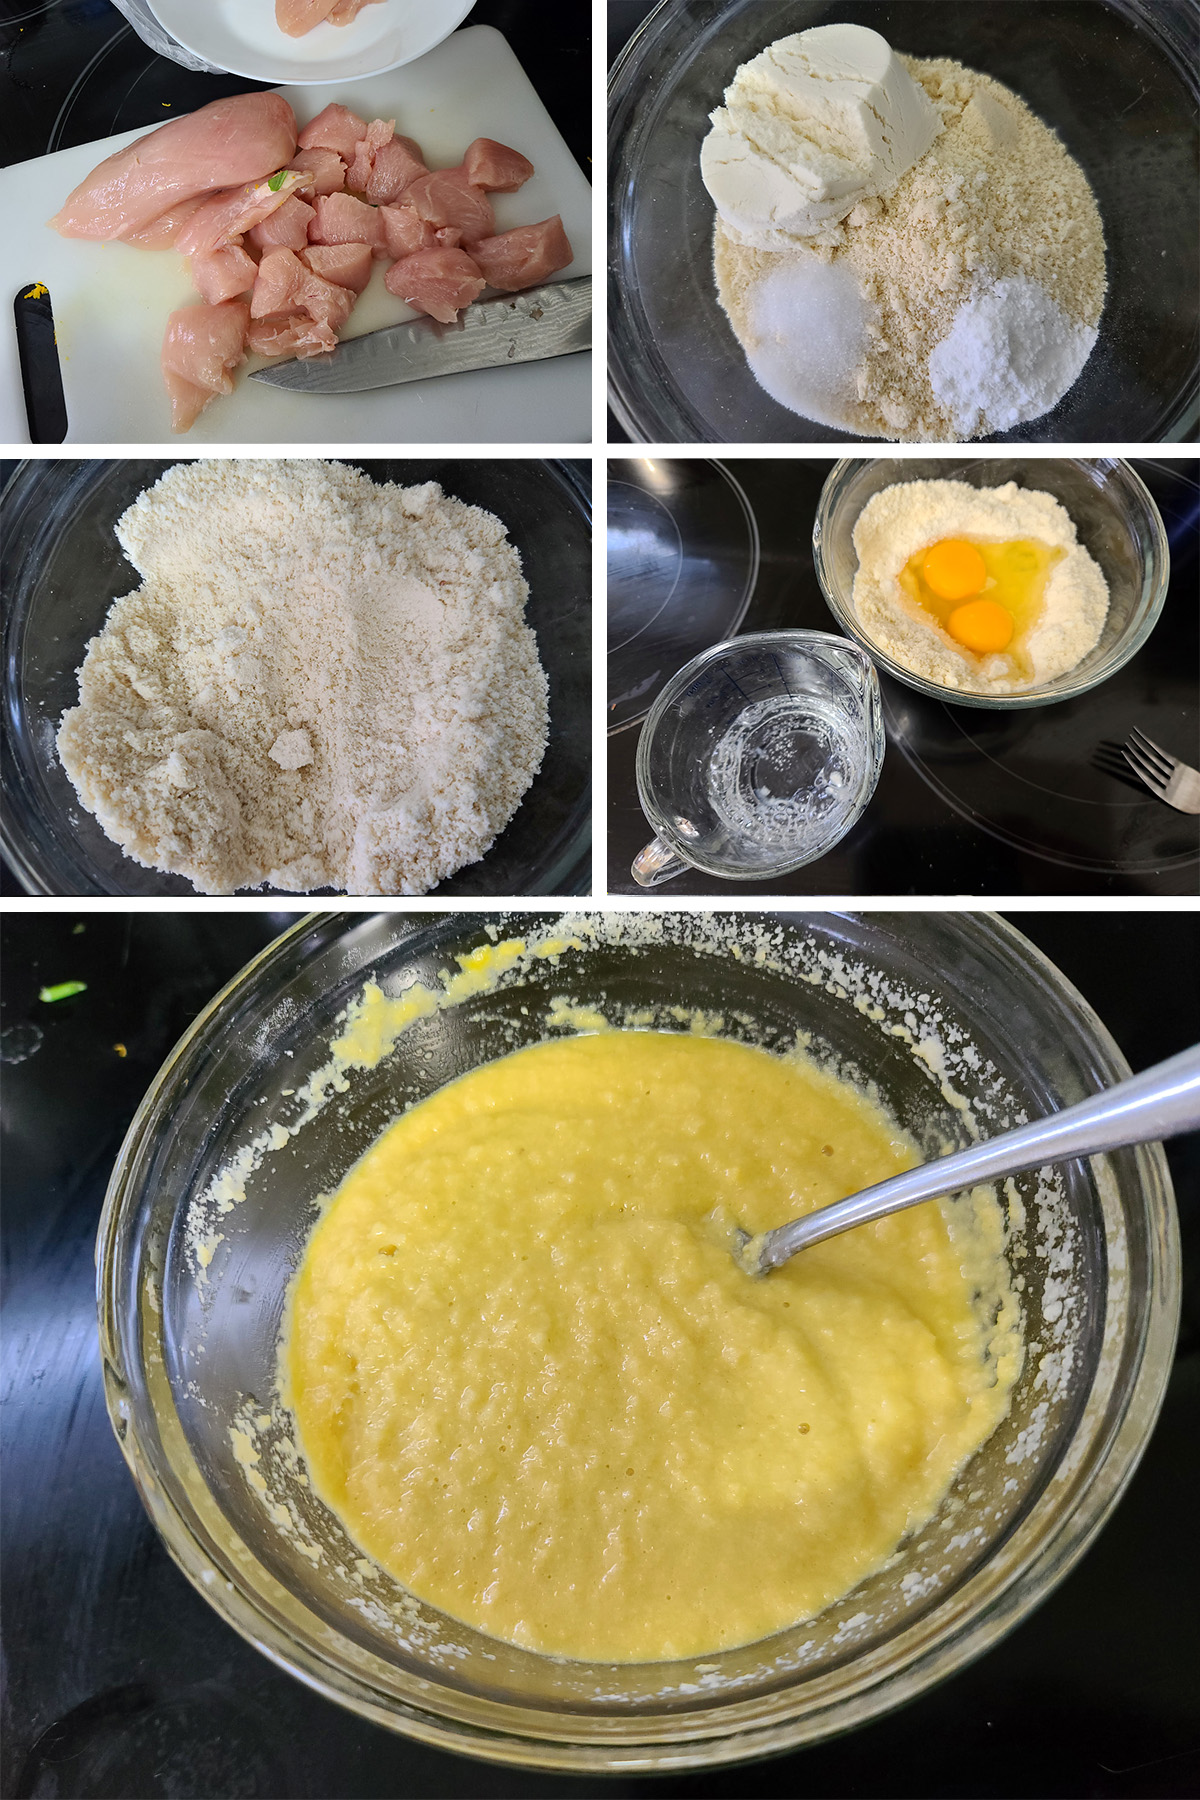 A 5 part image showing the batter being mixed together, as described.